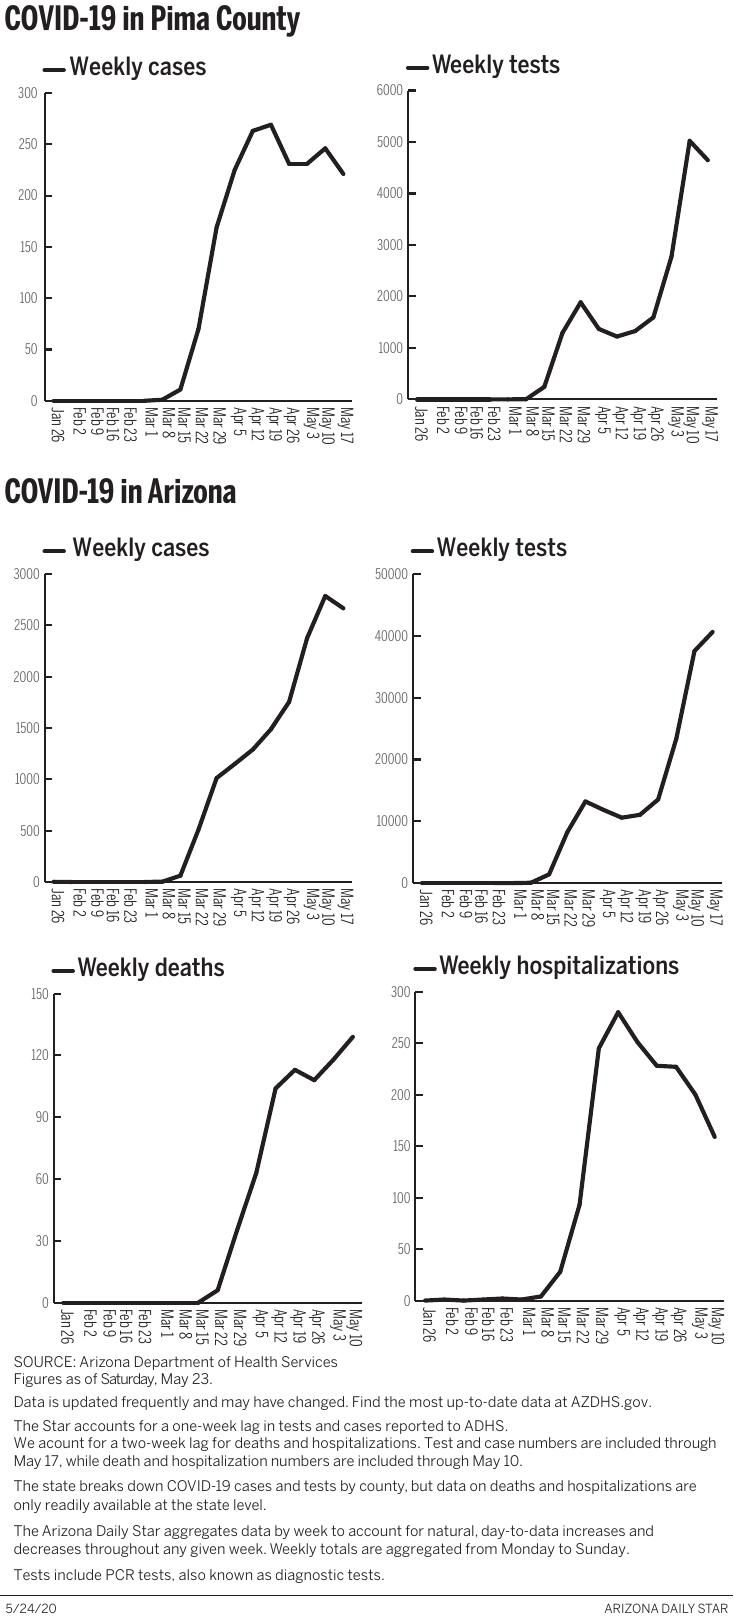 New coronavirus cases in Arizona "could maybe possibly" have peaked, data suggests